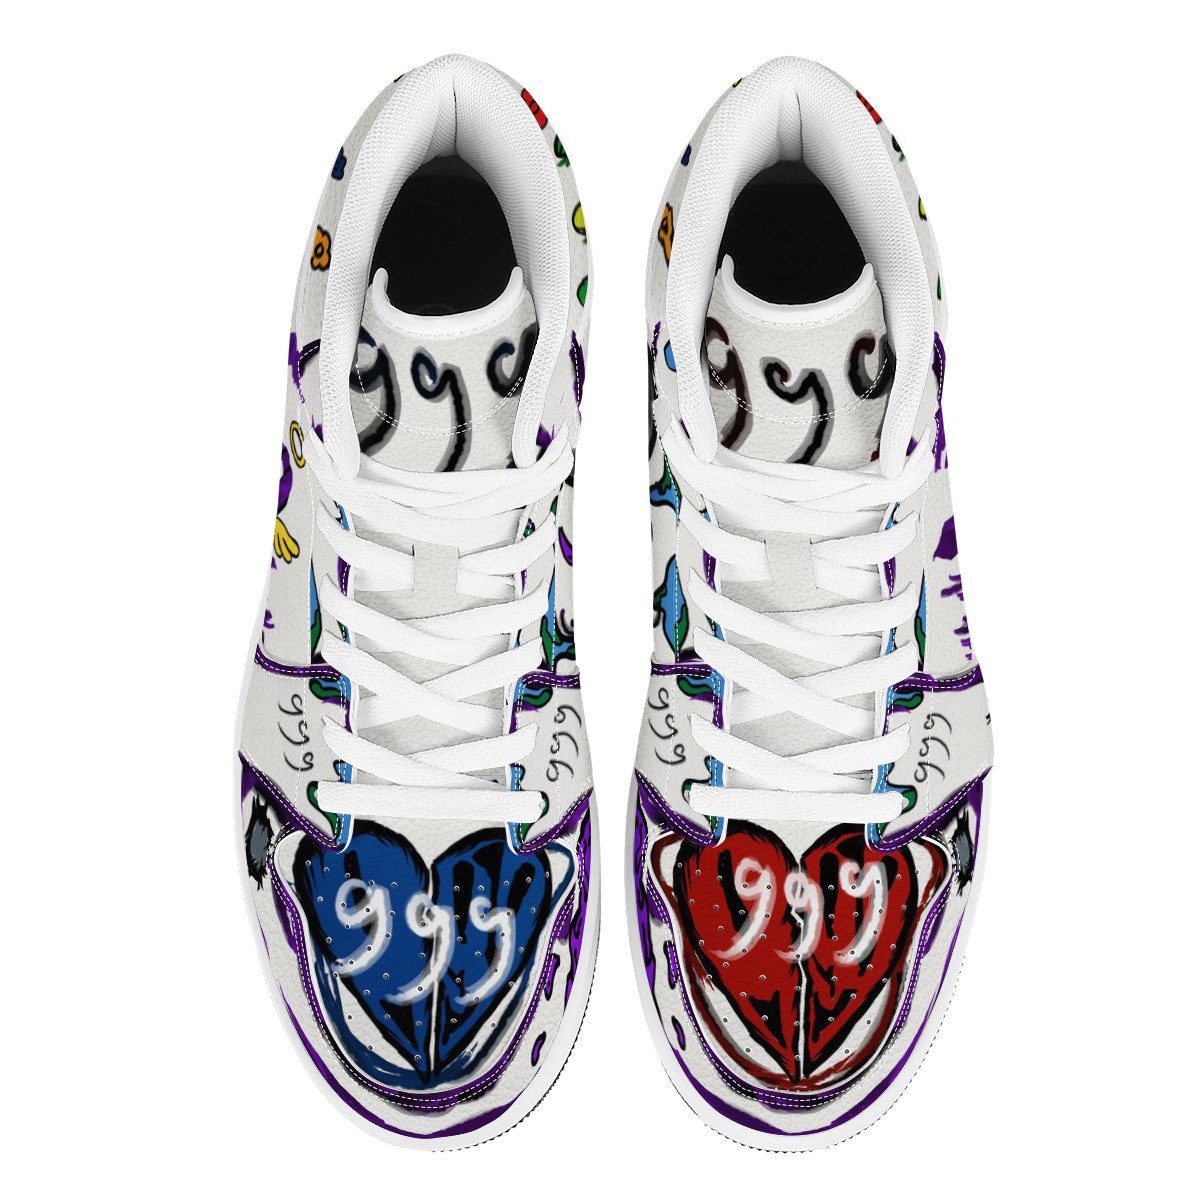 Juice Wrld 999 Collection  Shoes & Clothing - noxfan